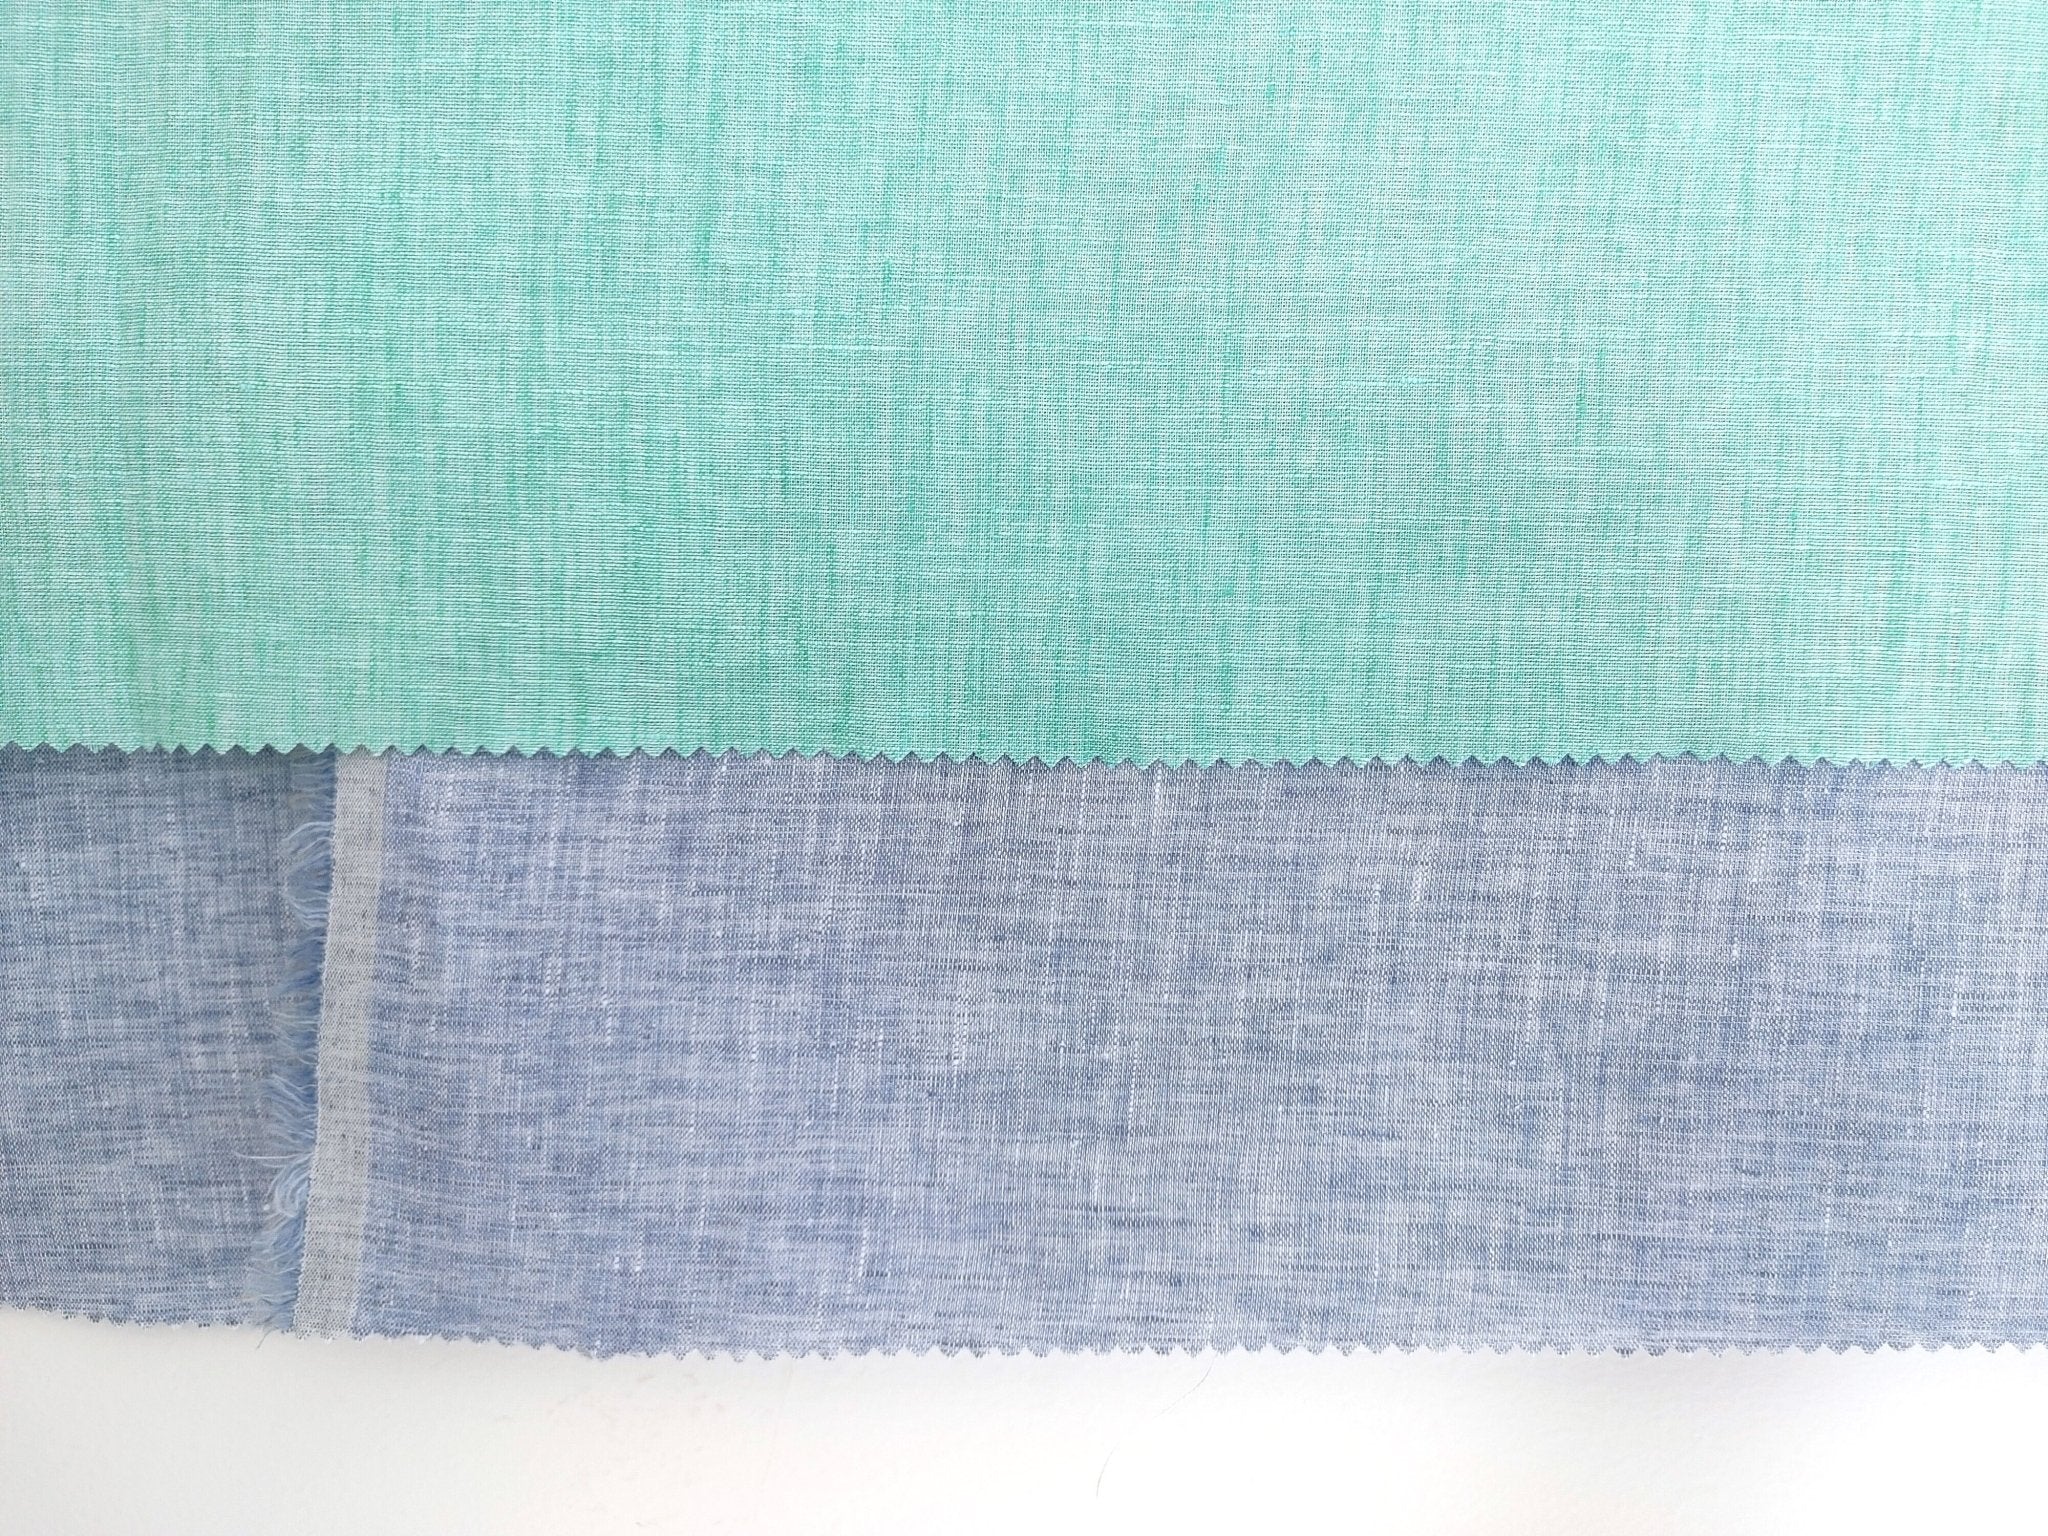 Lightweight 100% Linen Fabric: Two-Tone Chambray Elegance 7632 7746 - The Linen Lab - Blue